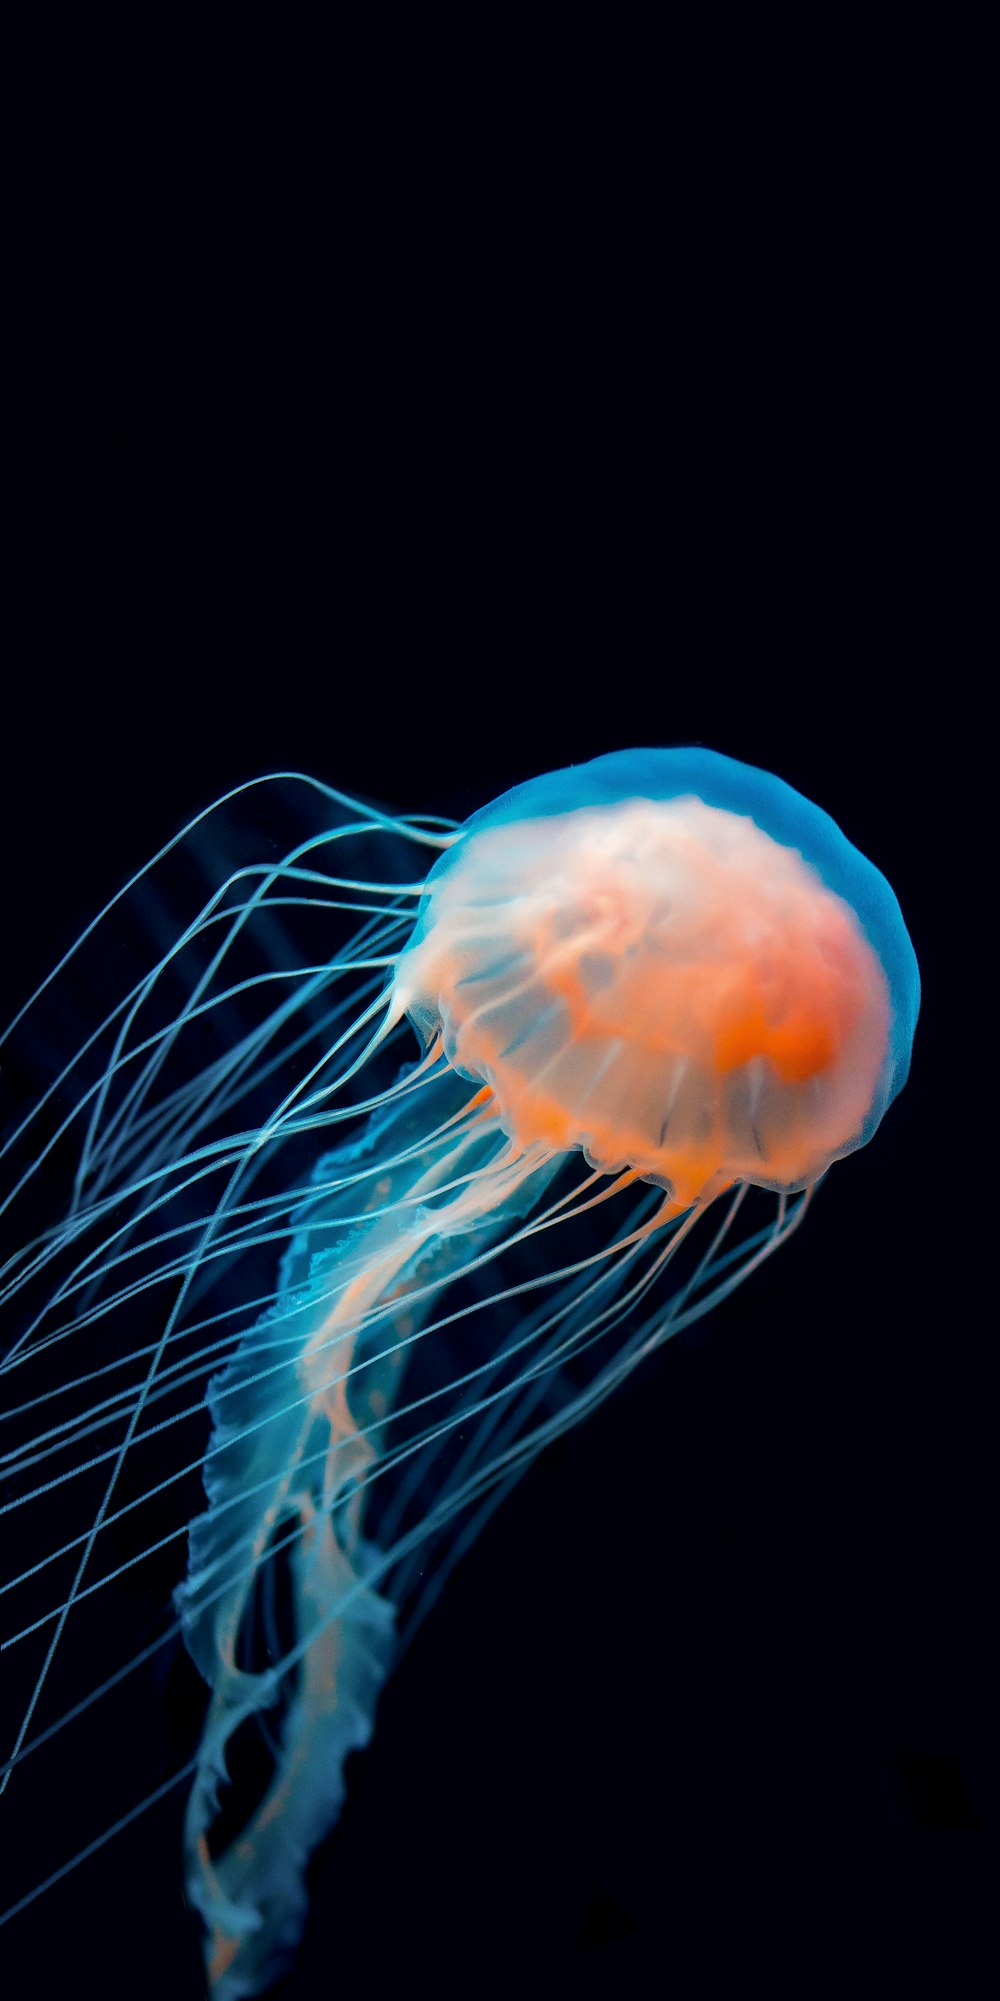 blue jellyfish in water in close up photography